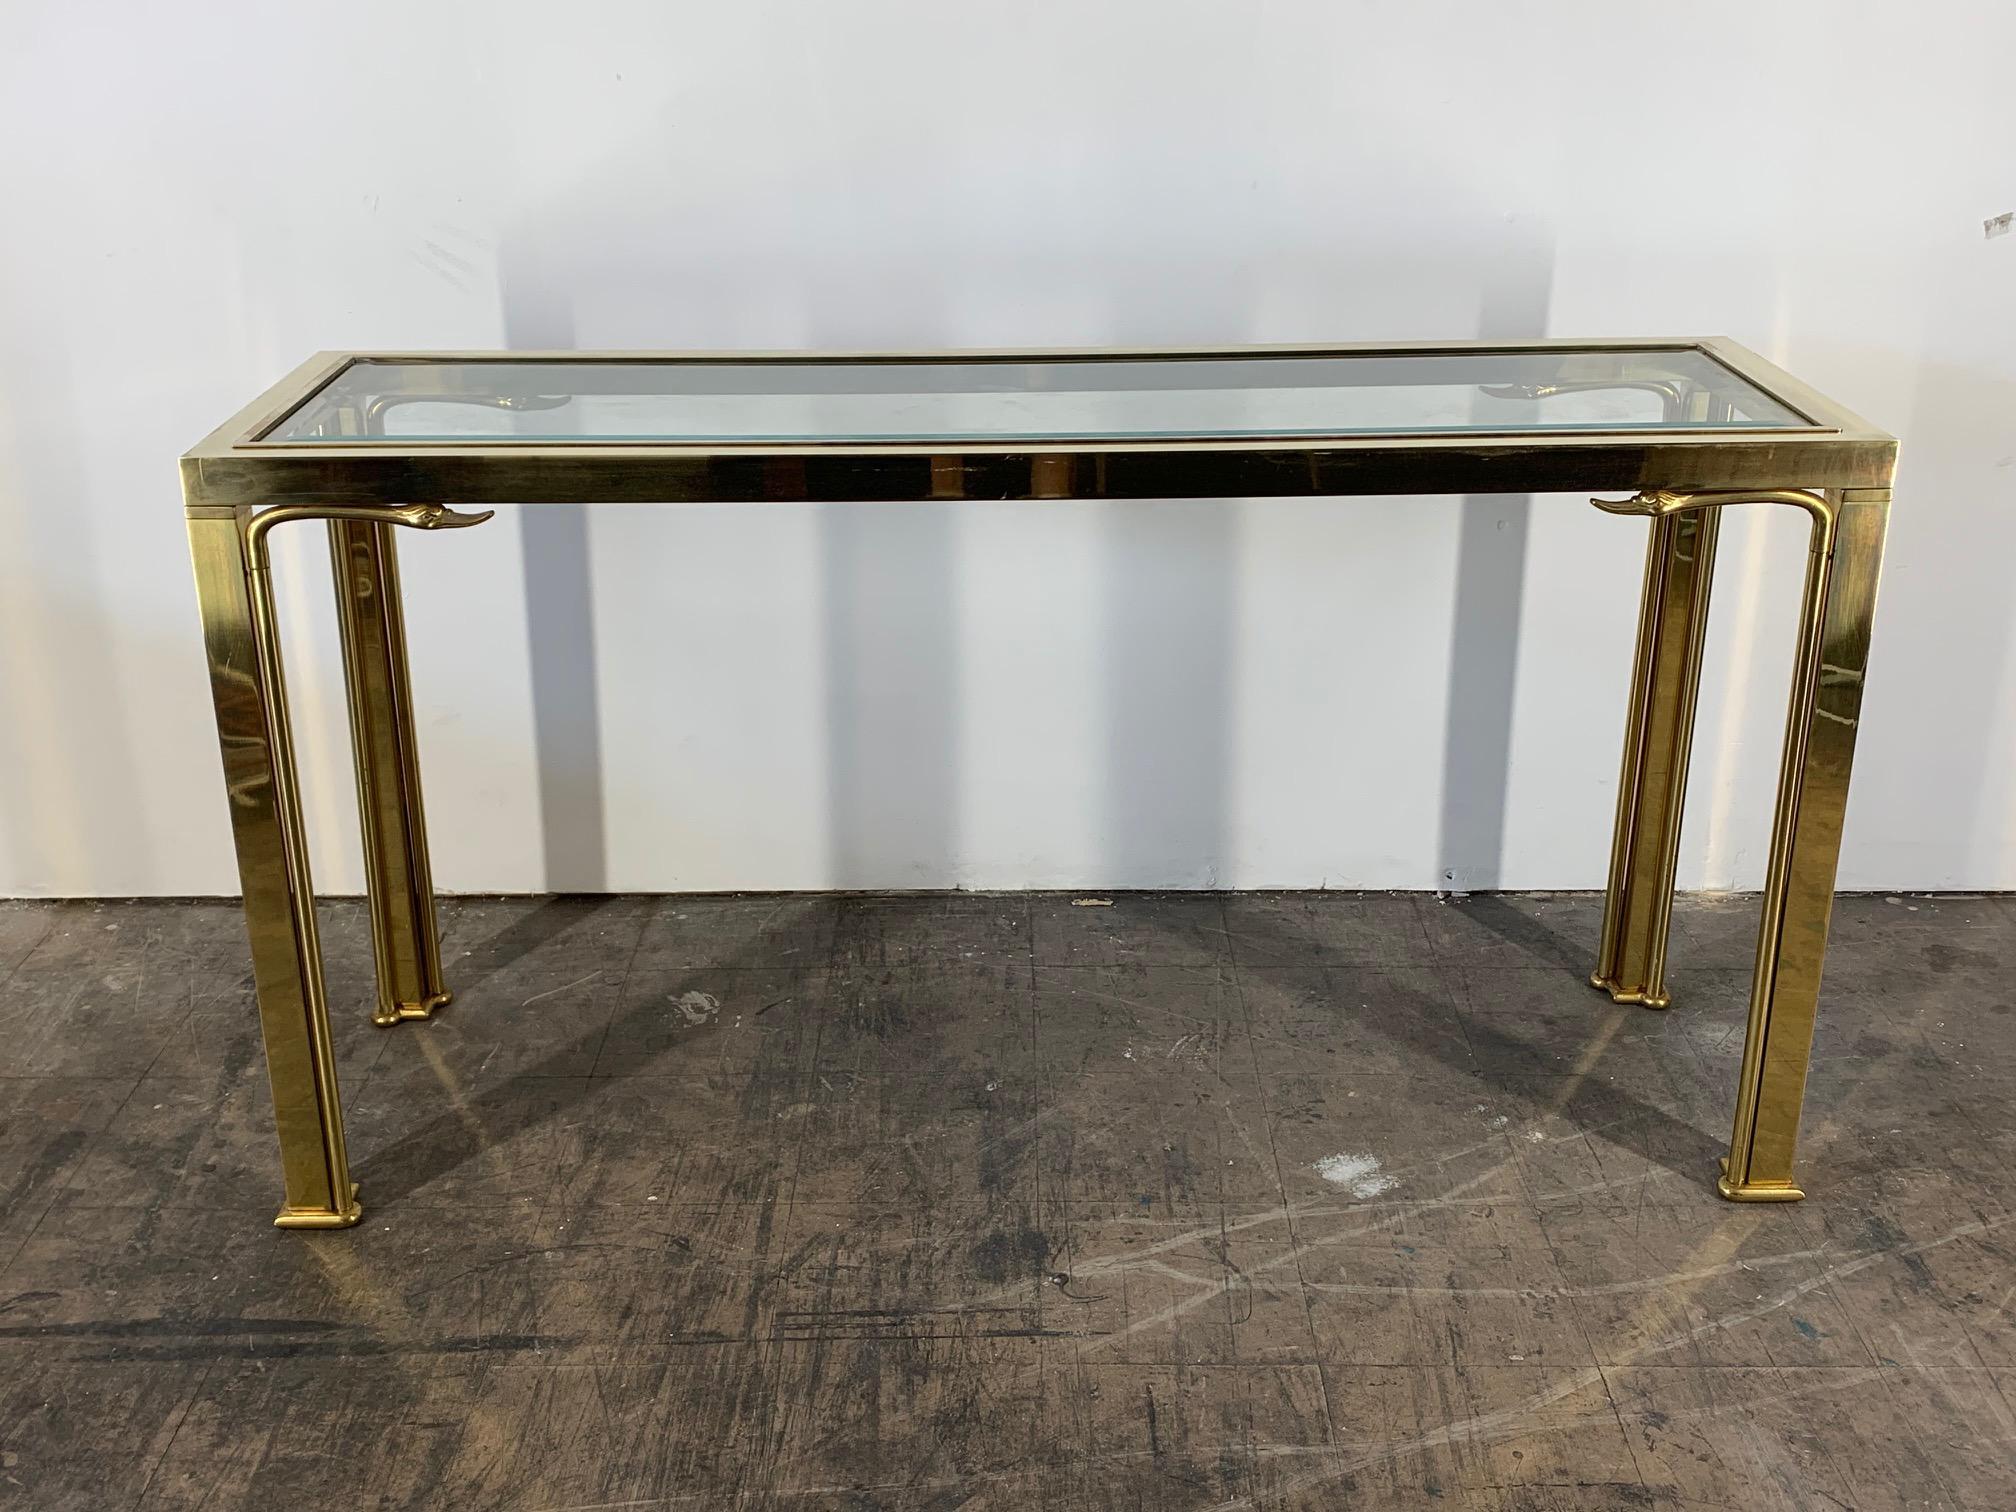 Brass console table by Mastercraft features swan head motif and beveled glass top. Good vintage condition with only minor imperfections consistent with age.